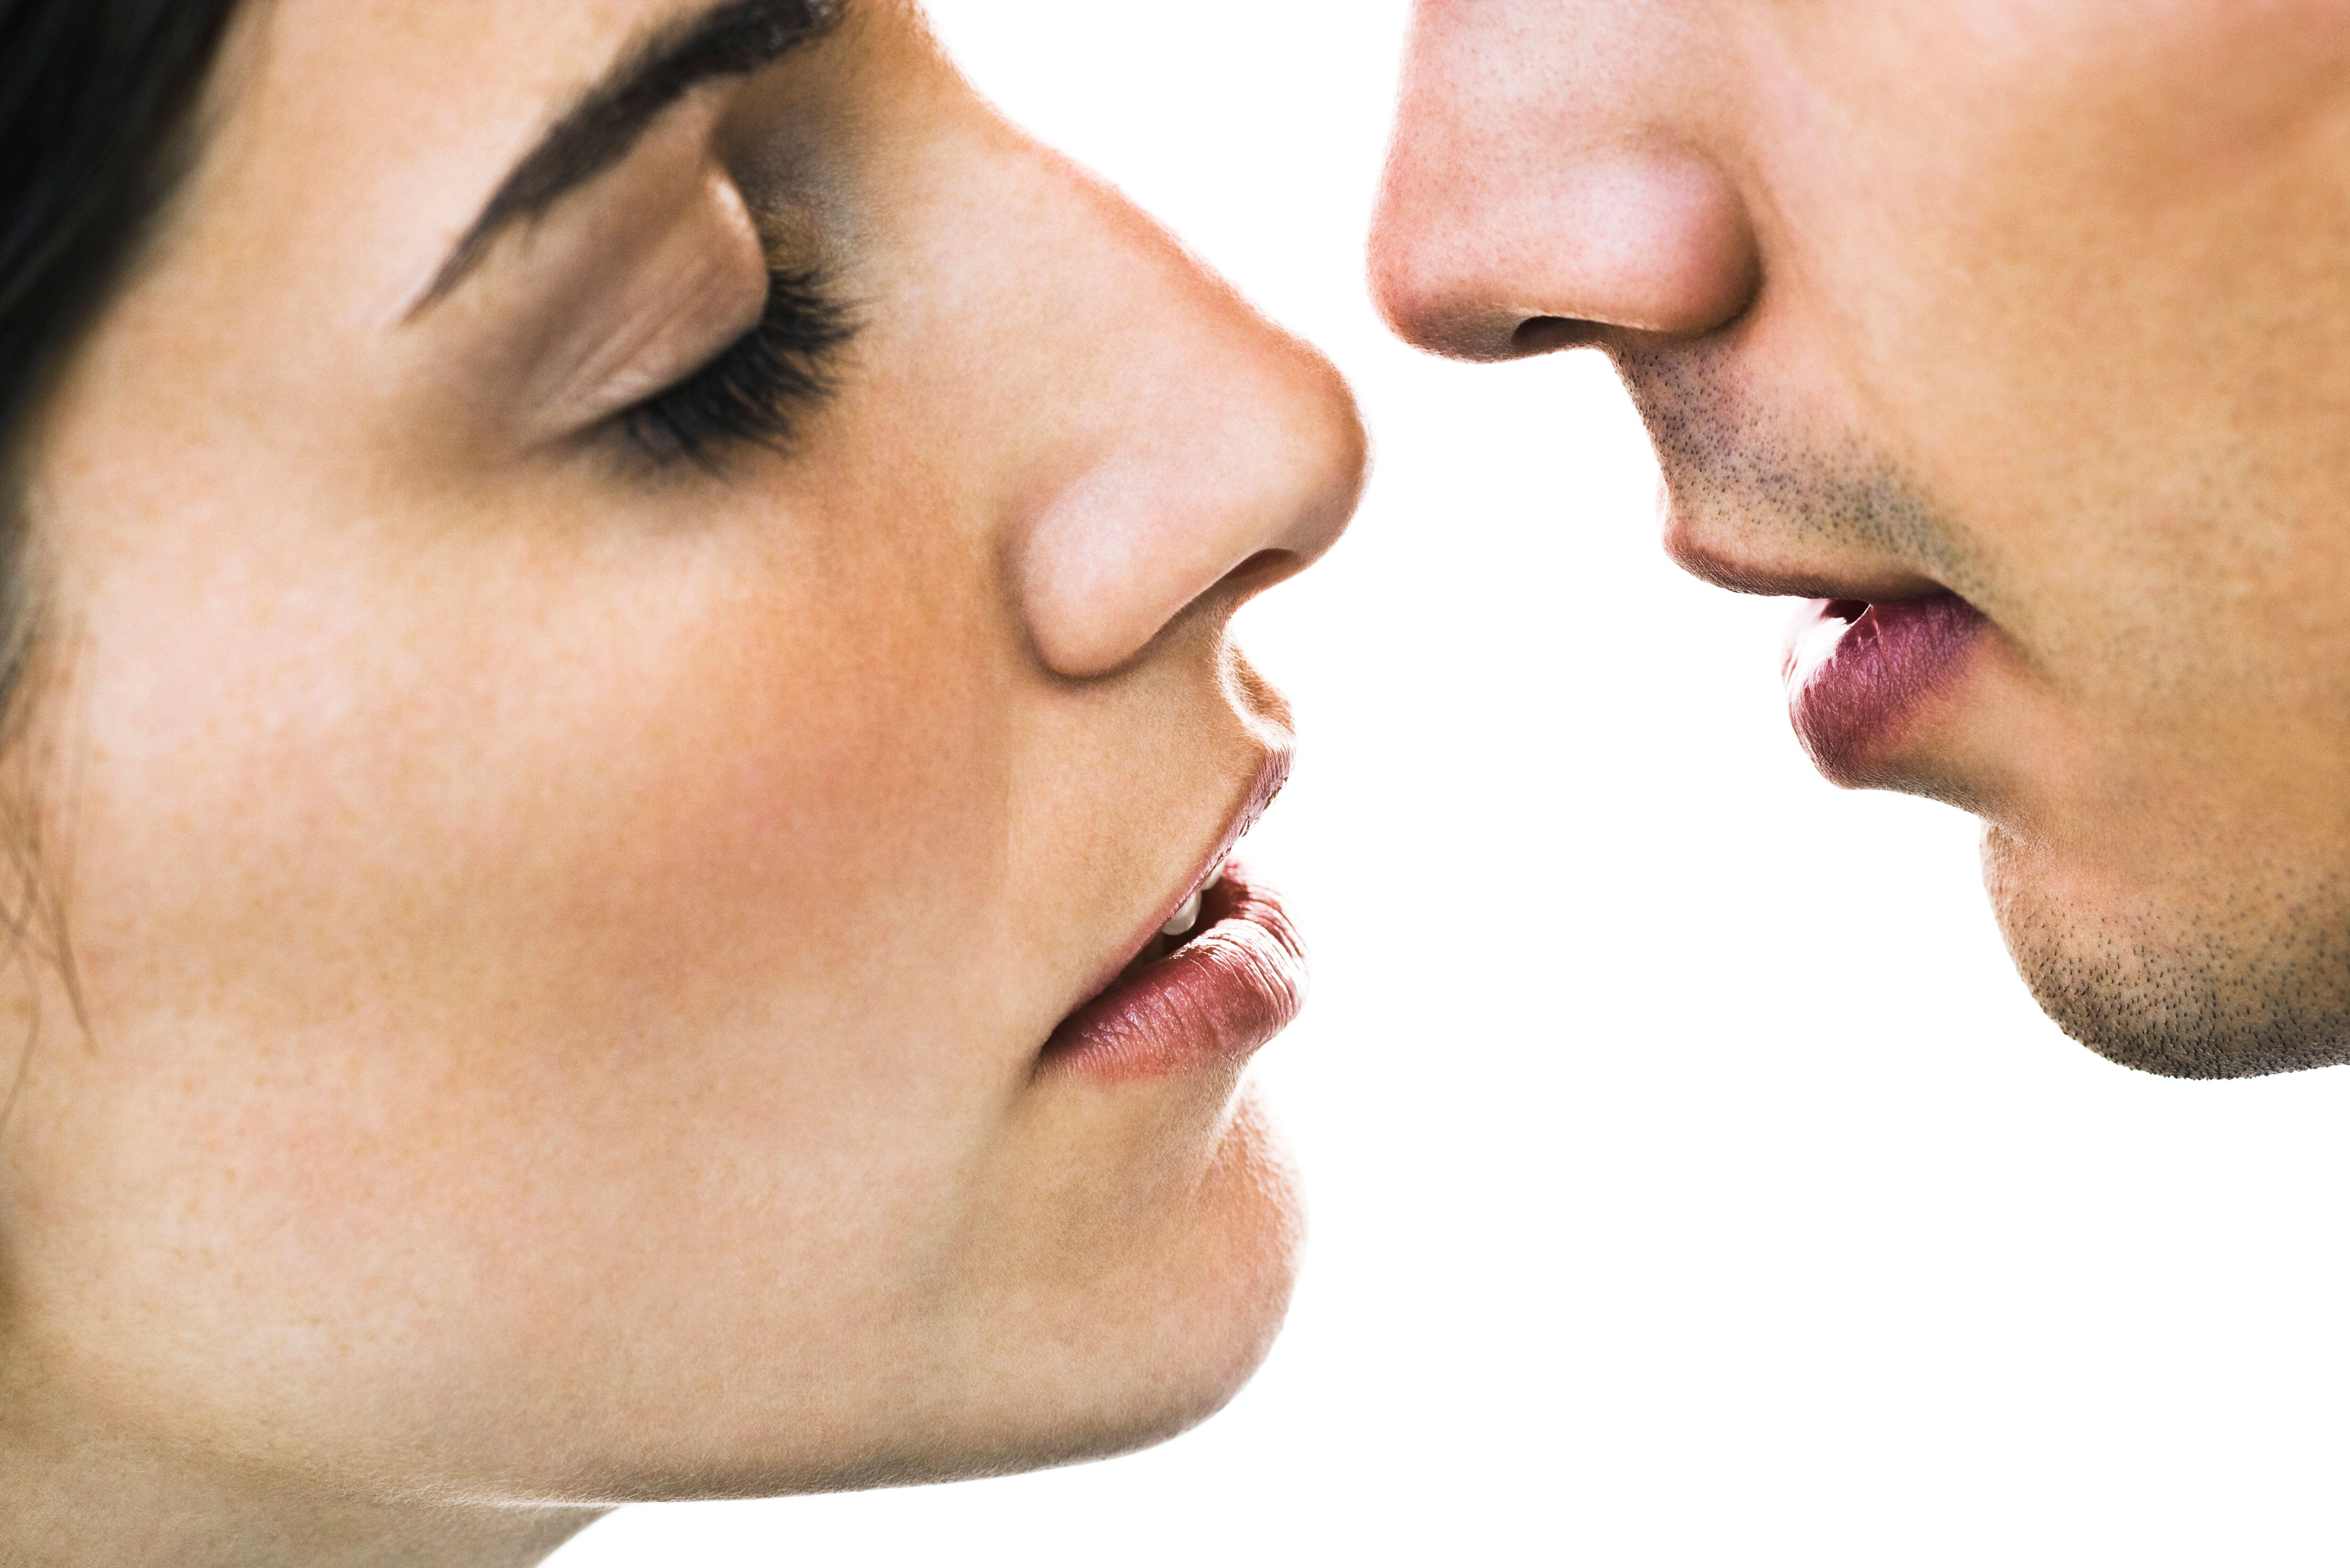 Men Can Smell When Women Are Aroused Research picture